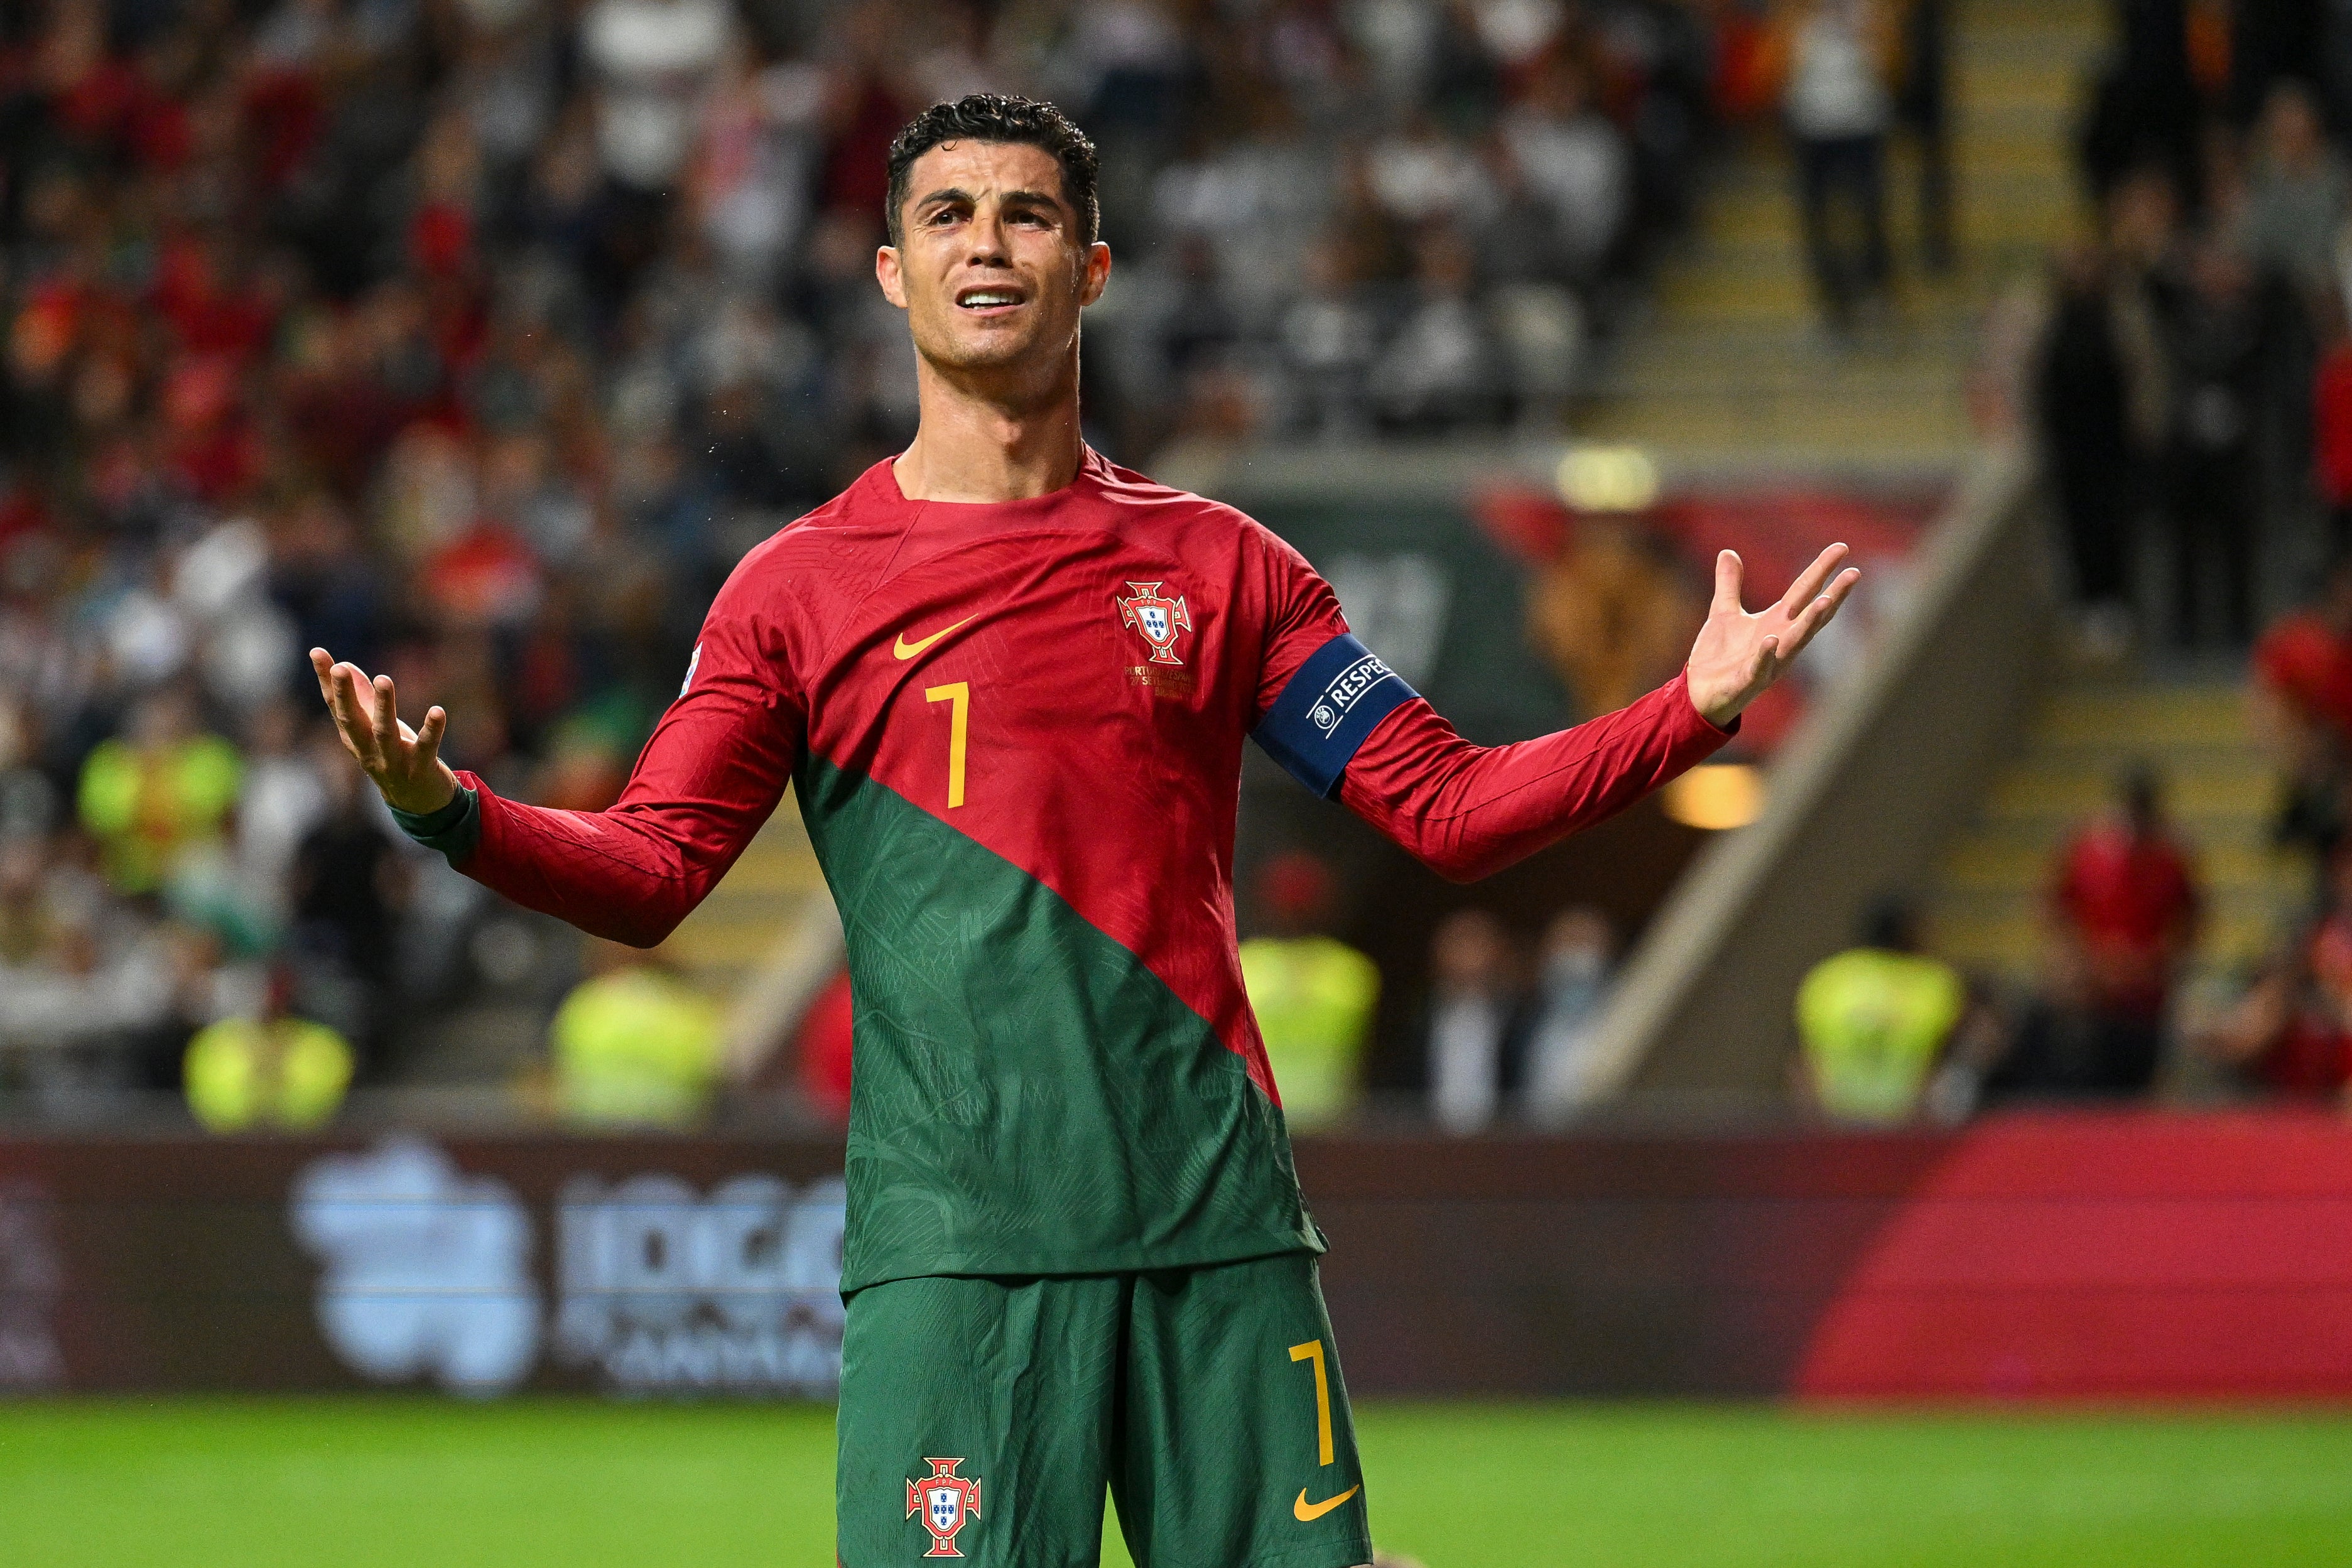 Ronaldo has endured furstration for club and country in recent times